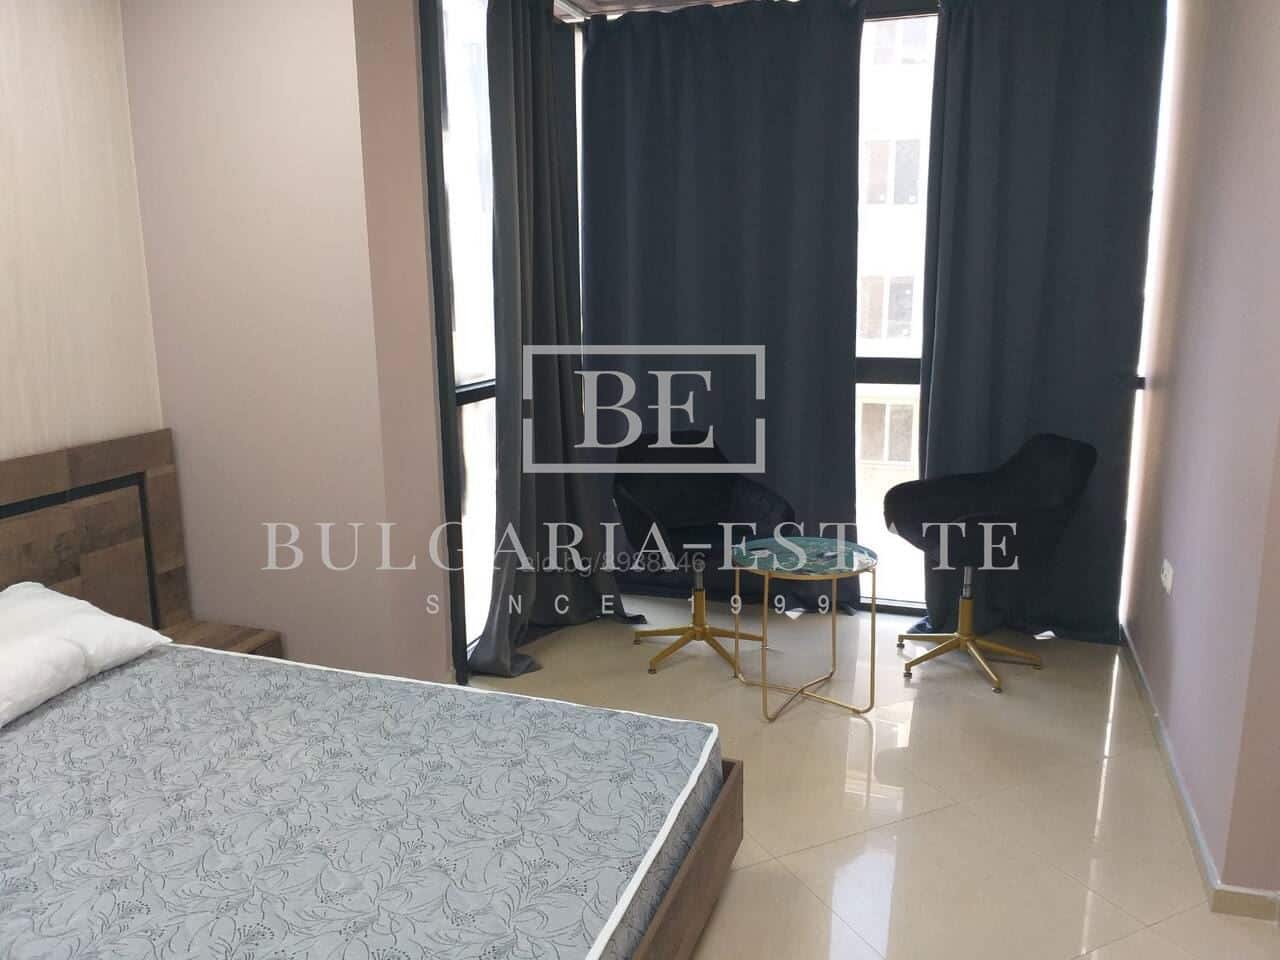 🏢 Spacious Two Bedroom Apartment with South Exposure and Convenient Location 🏢 - 0